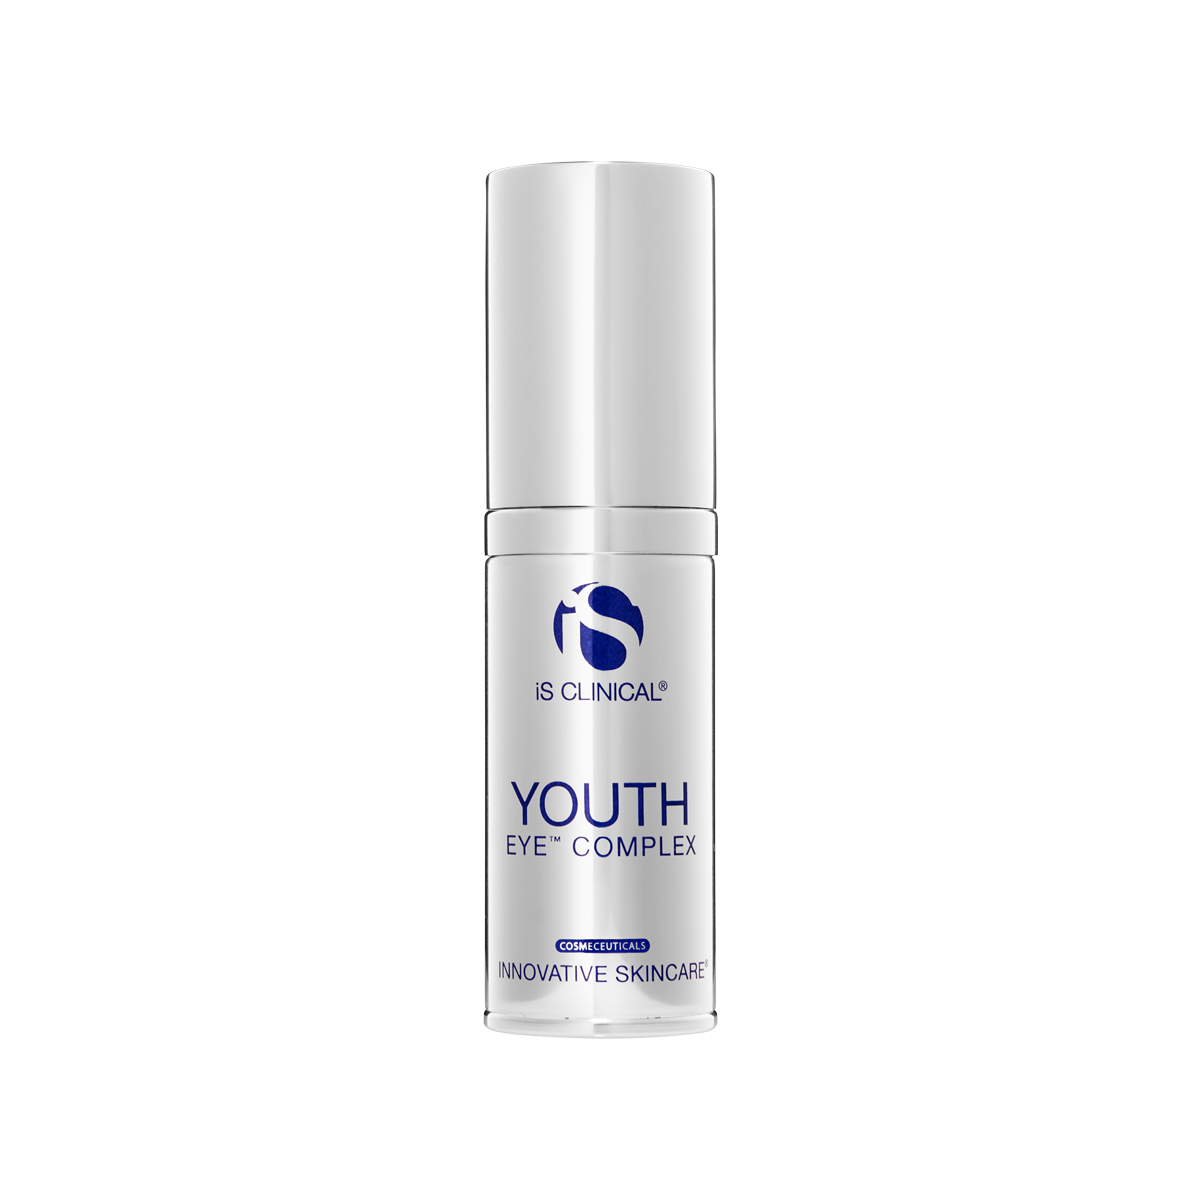 iS Clinical Youth Eye Complex (15g)